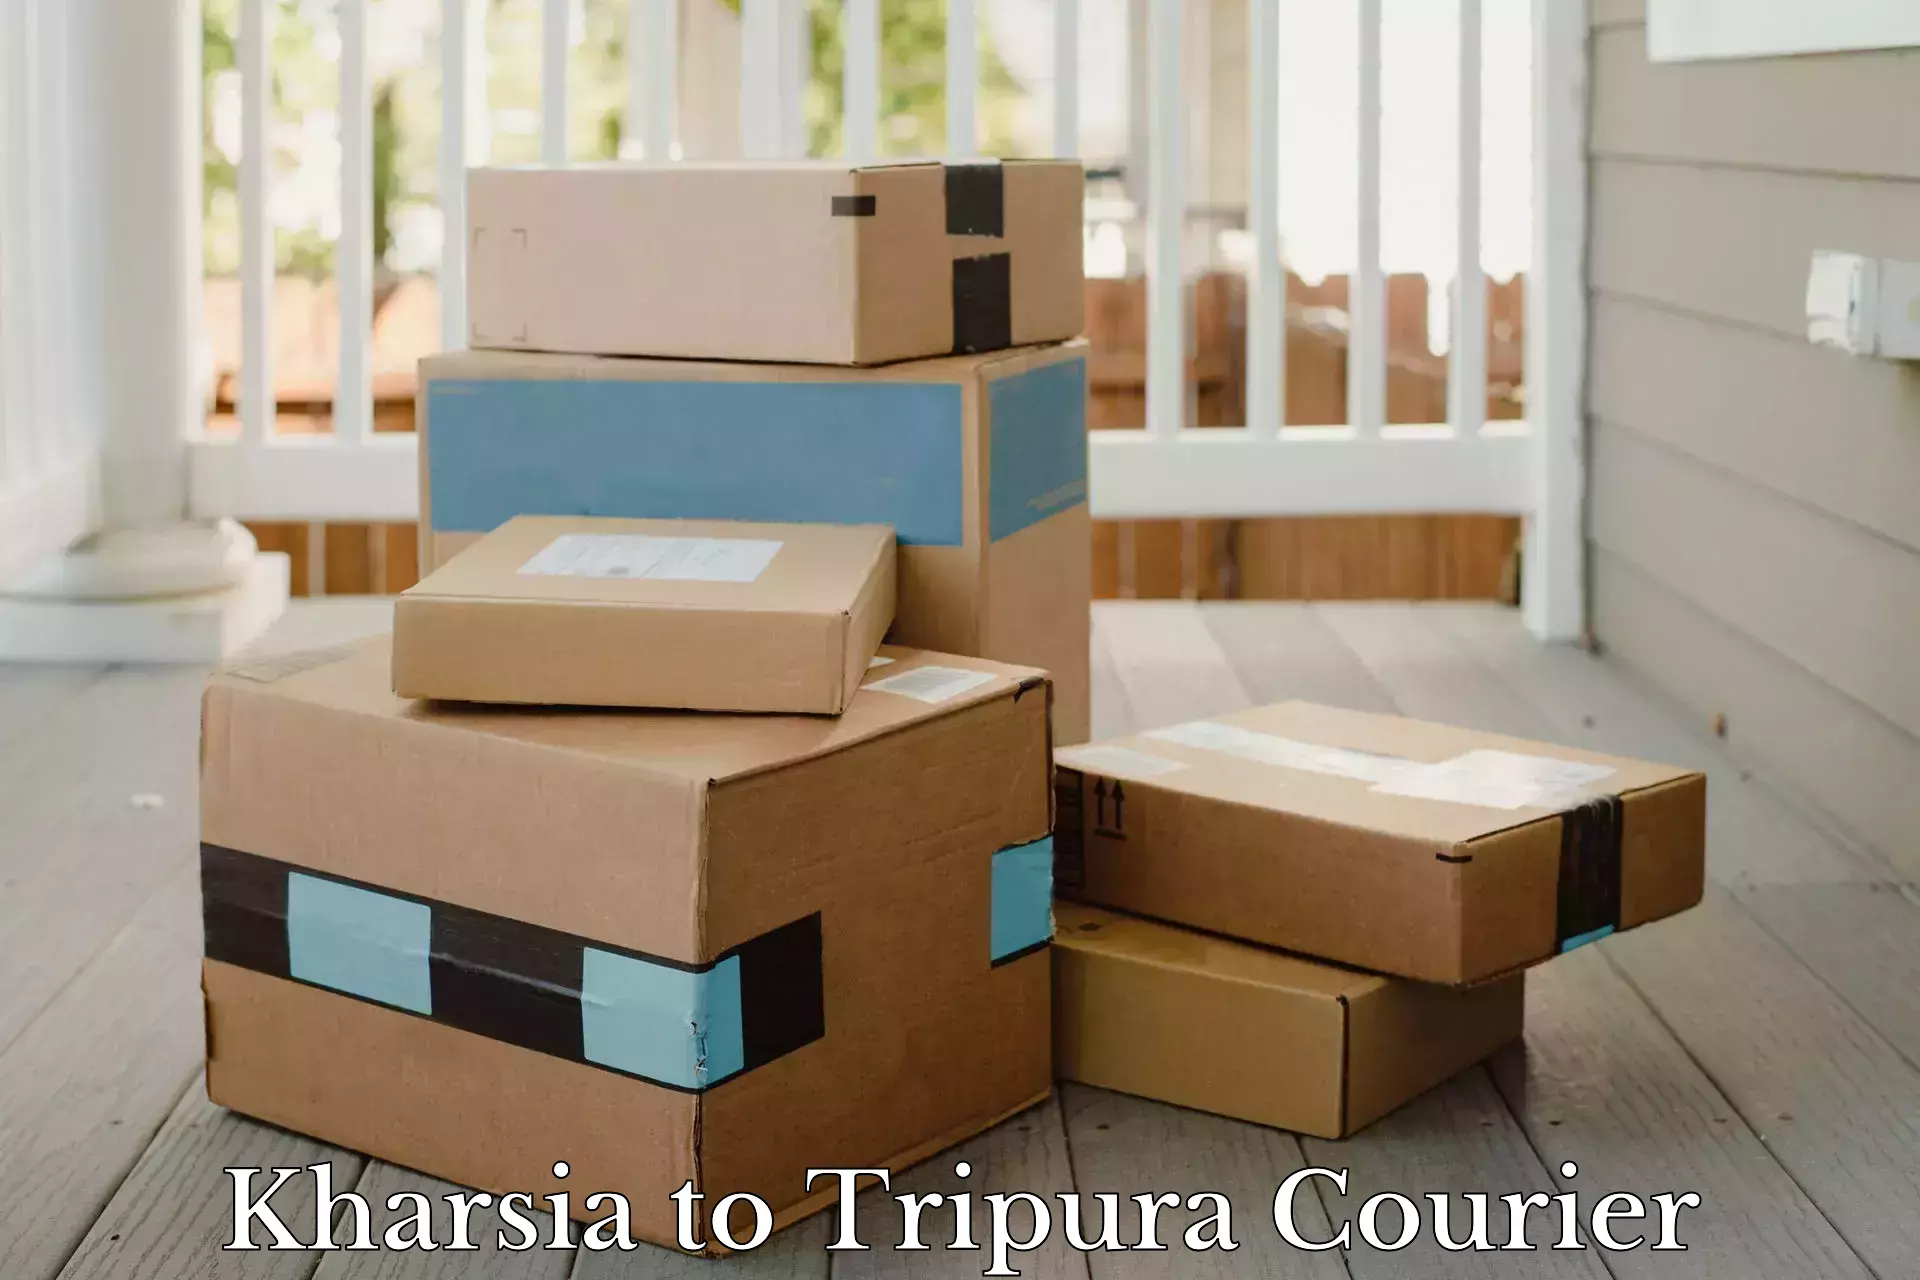 Residential courier service Kharsia to Tripura